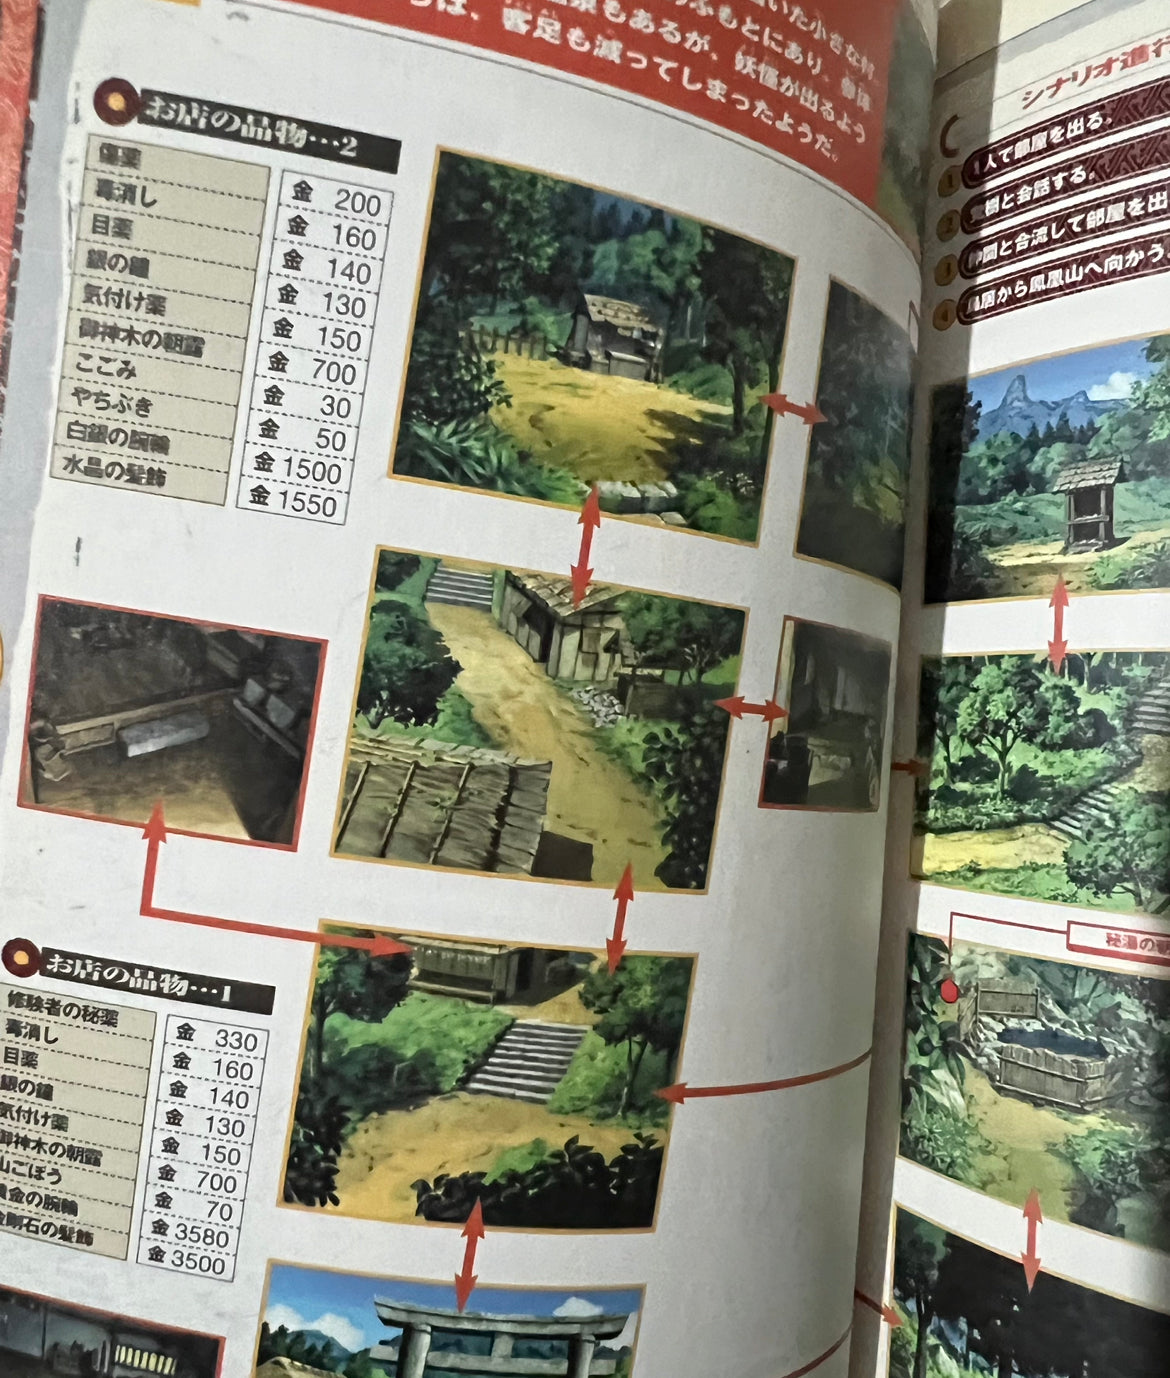 Inuyasha: Playstation Game Official Complete Guidebook - Japanese